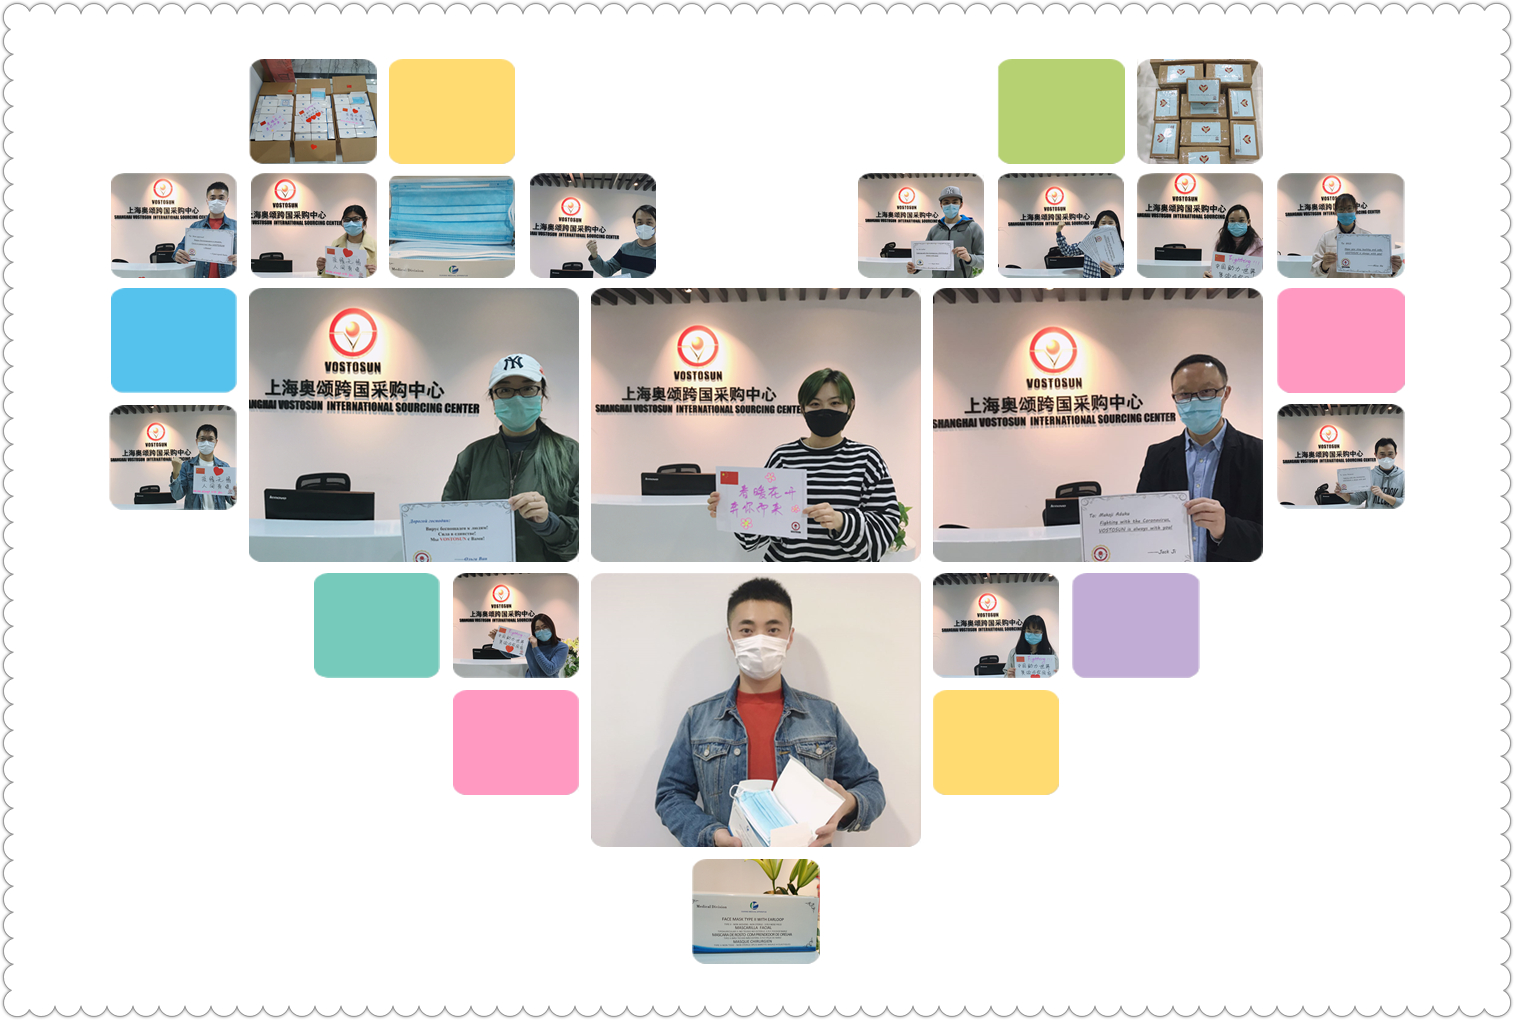 In March 2020, we sent customers free face masks to show our concern.